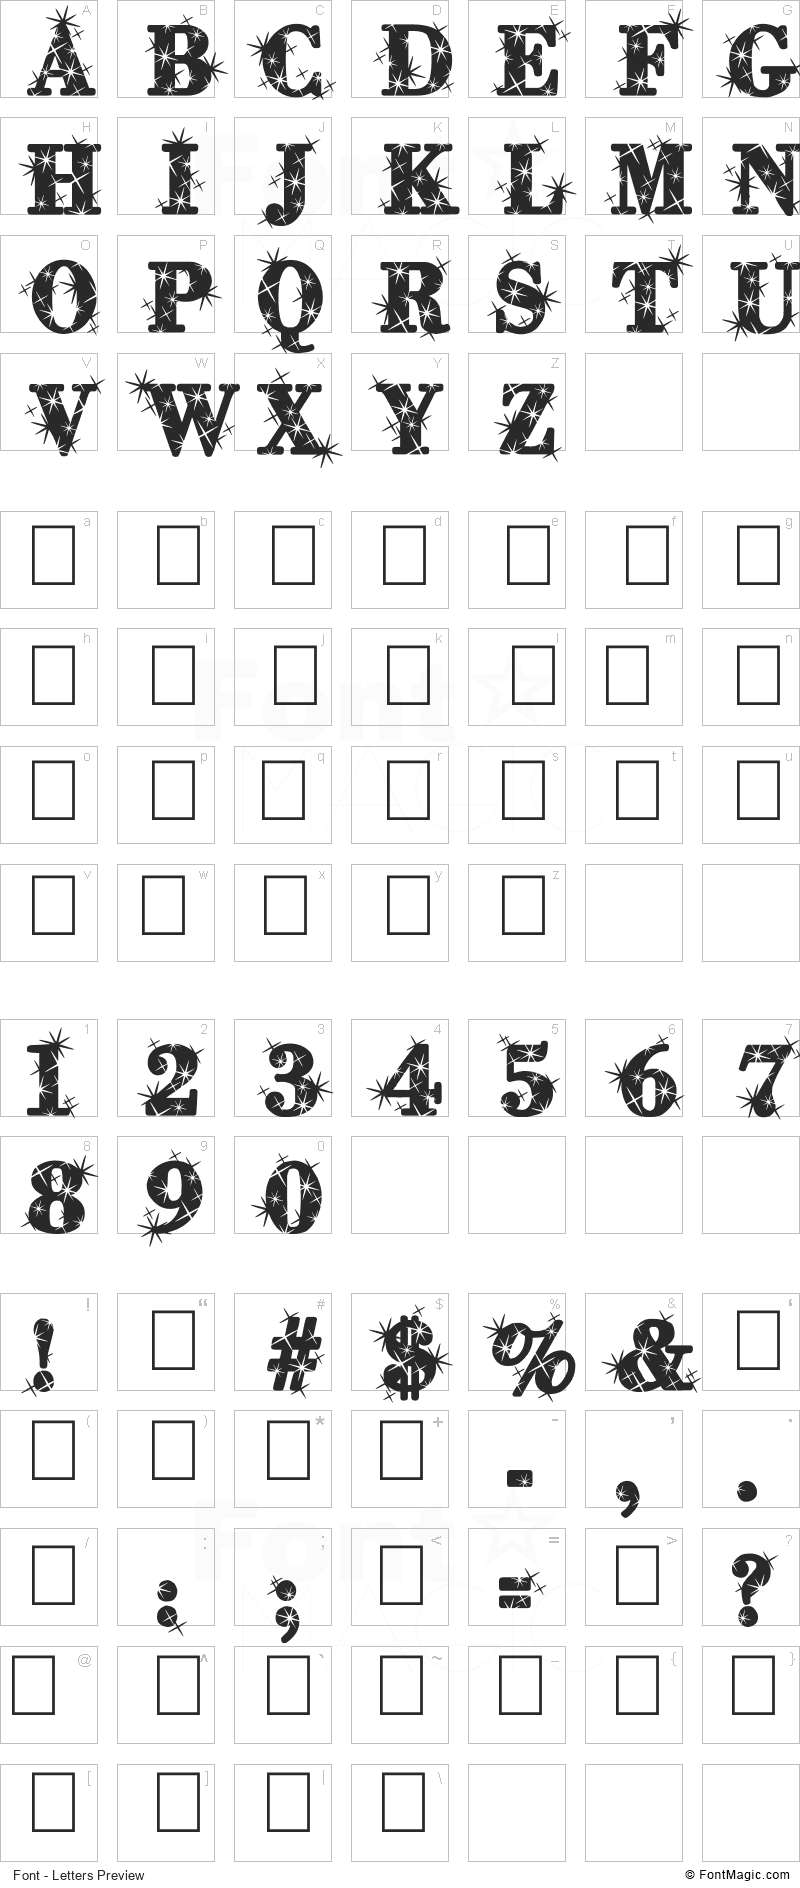 City of Light Font - All Latters Preview Chart